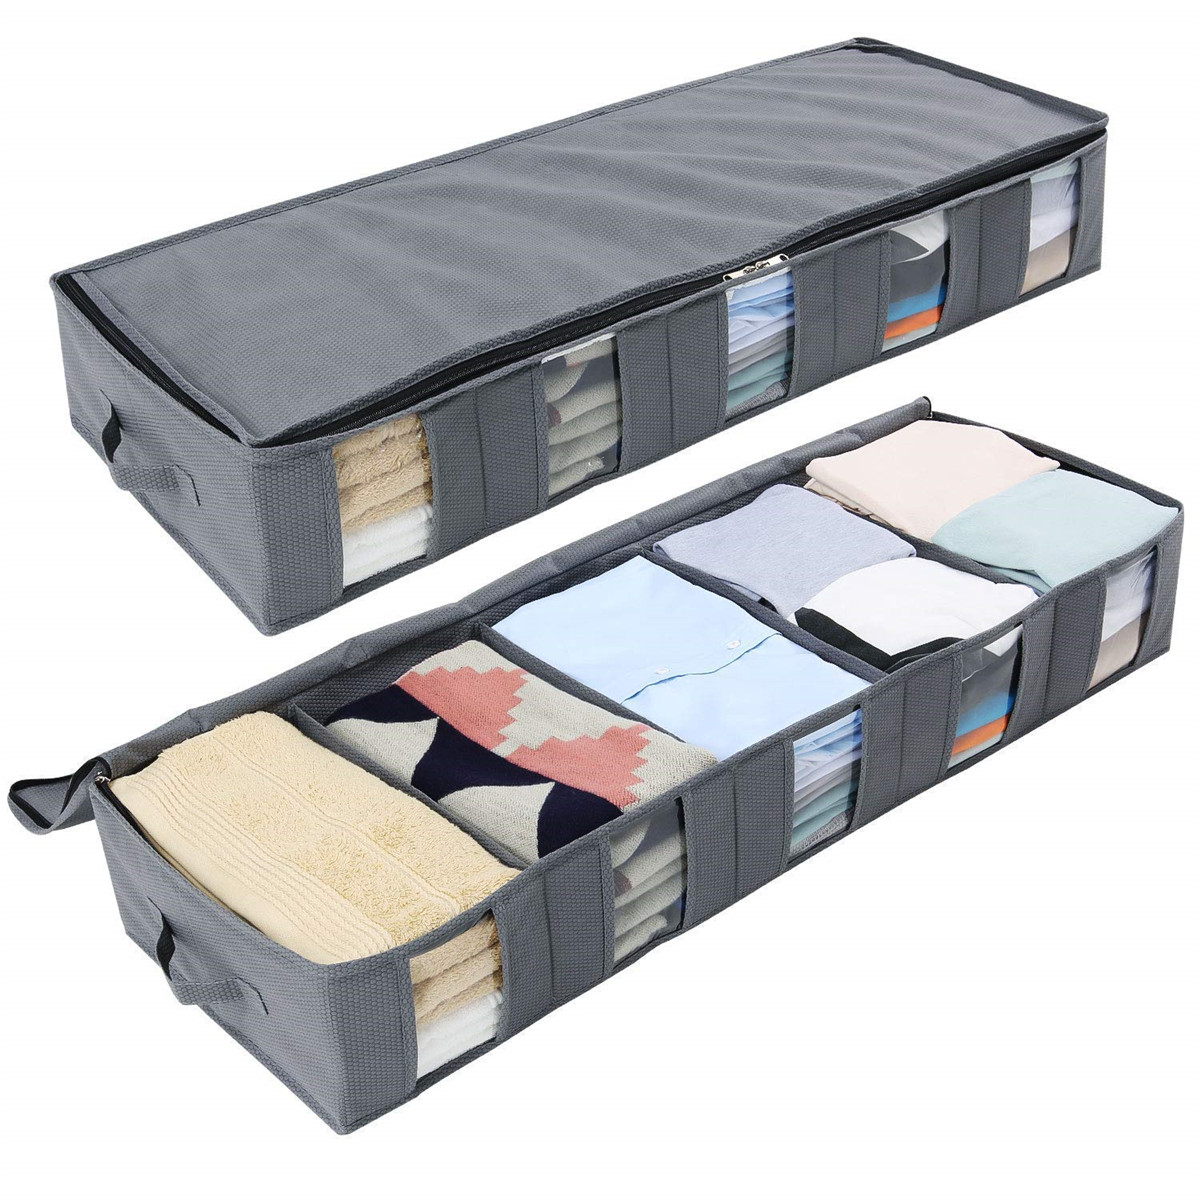 

5 Grid Clothing Storage Bag Box Non-woven Fabric Foldable Cl